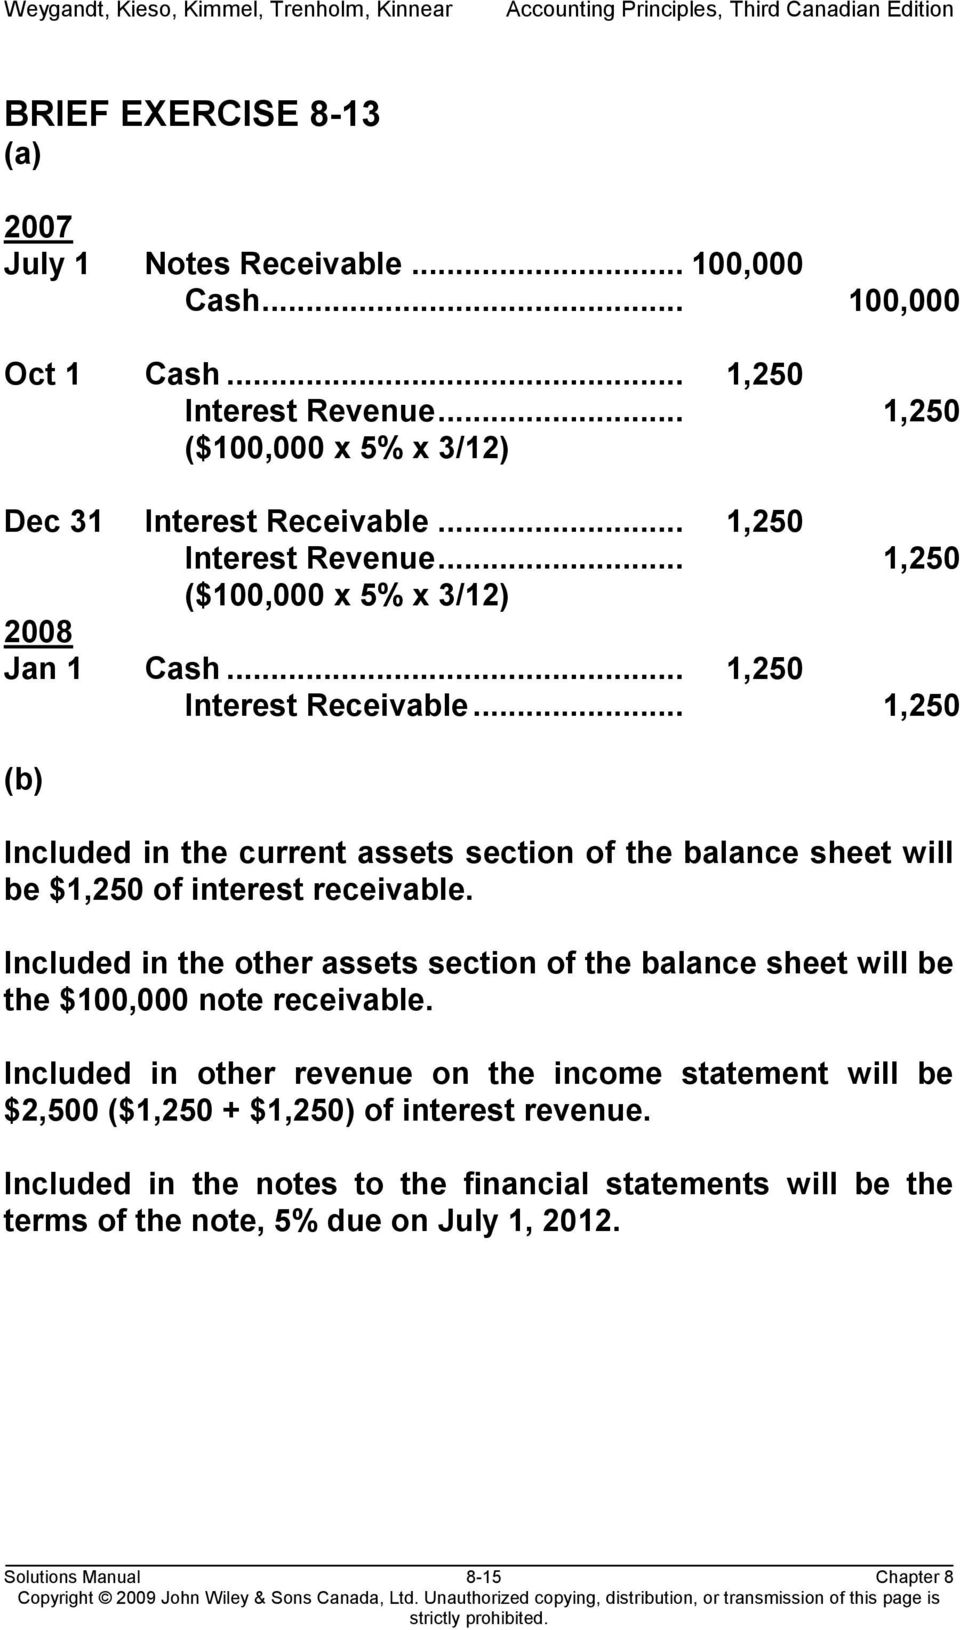 .. 1,250 (b) Included in the current assets section of the balance sheet will be $1,250 of interest receivable.